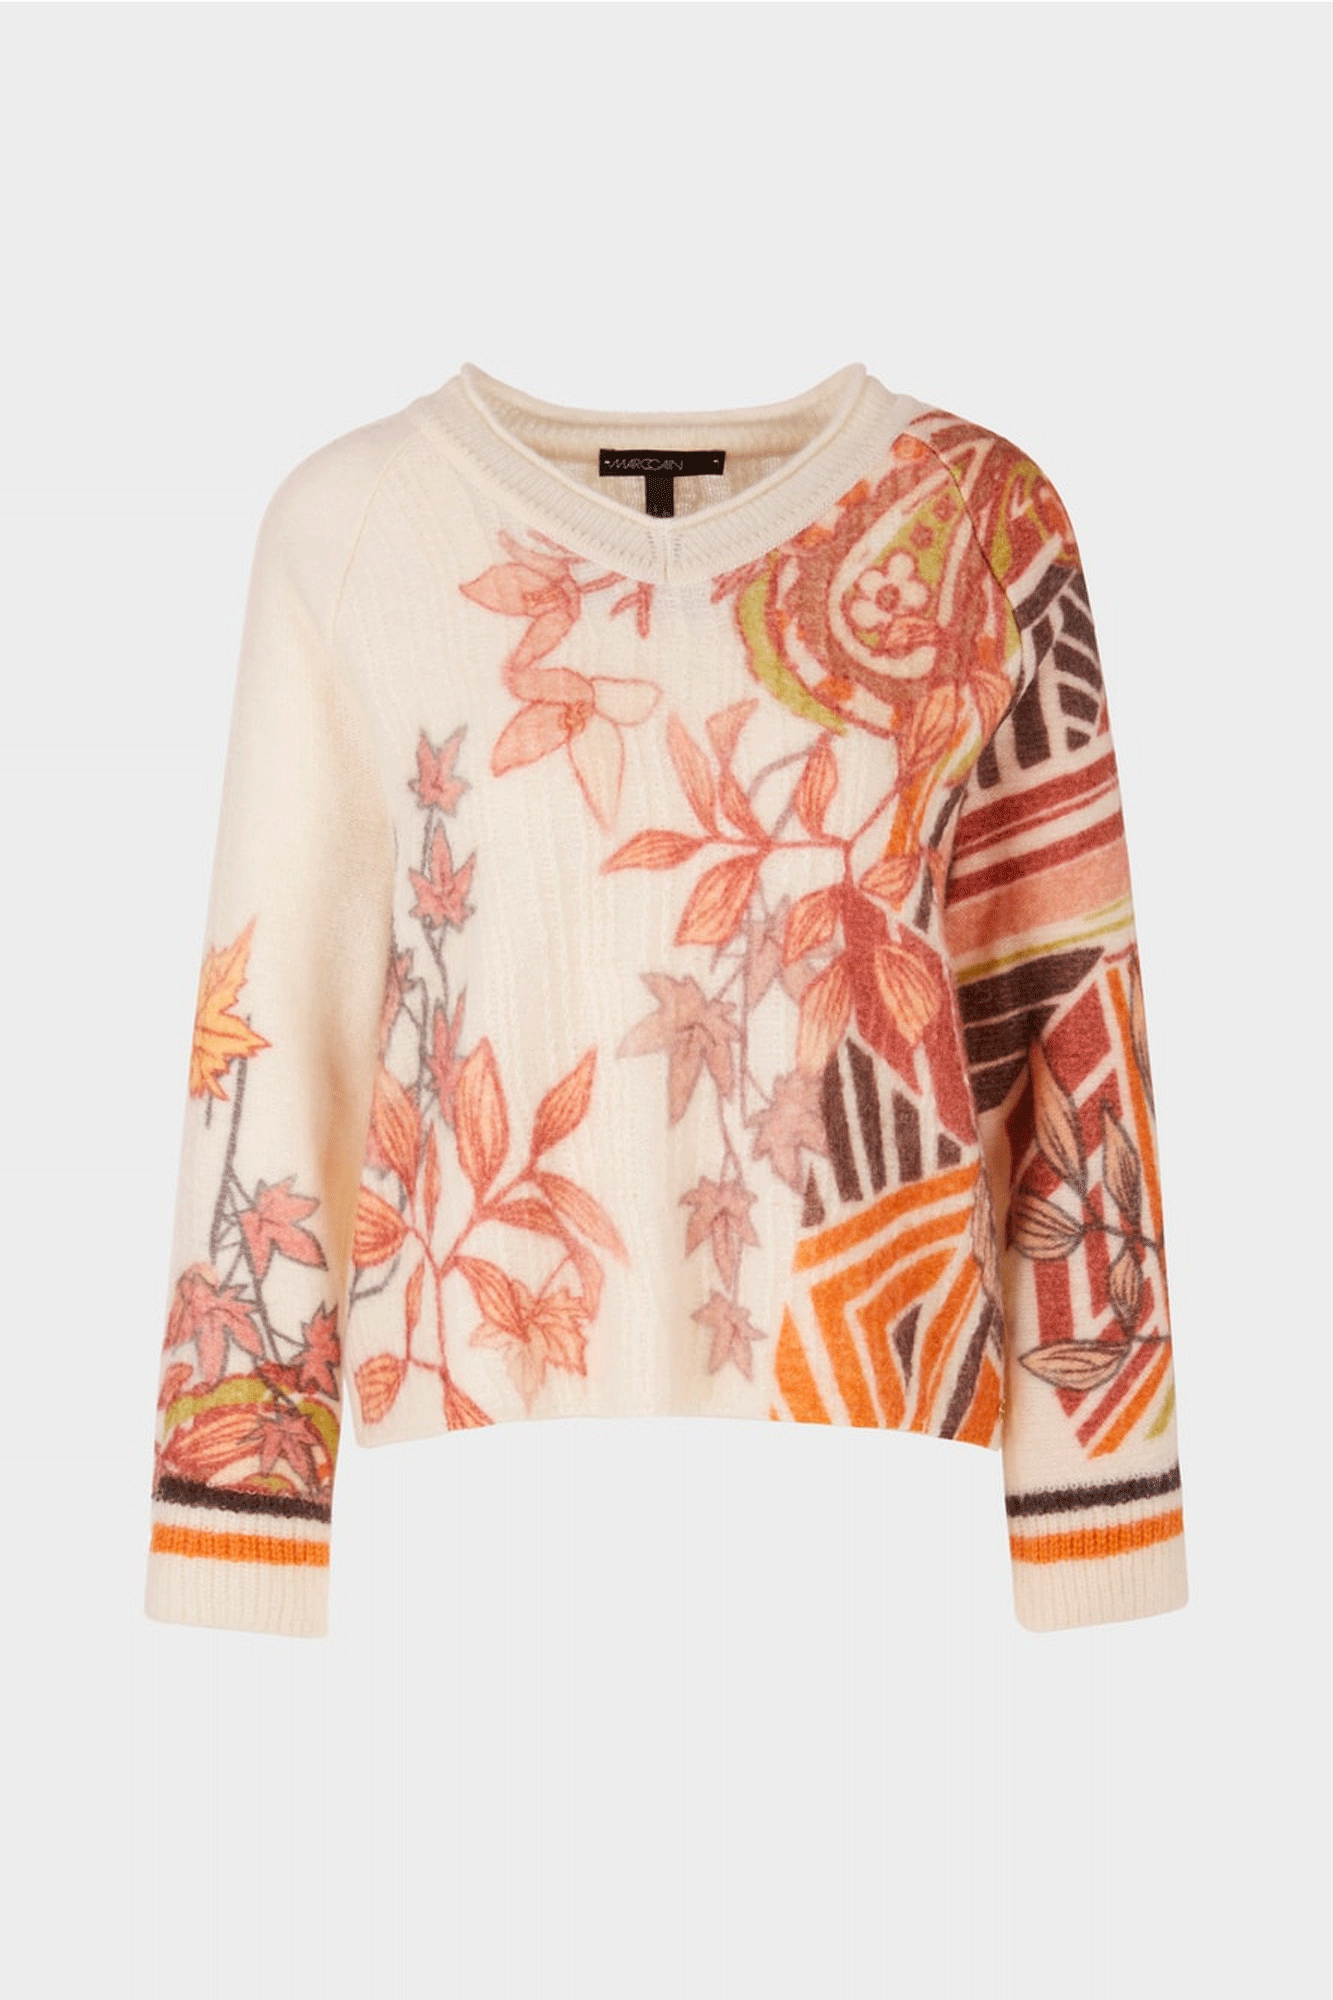 Experience the luxurious comfort and style of this Printed Sweater. Crafted with a 3-D knitting process from German-sourced materials, this sweater features a deep V-neck and wide raglan sleeves with a placed leaf design. Enjoy exceptional comfort and quality without seams, as the entire production process takes place in Germany.